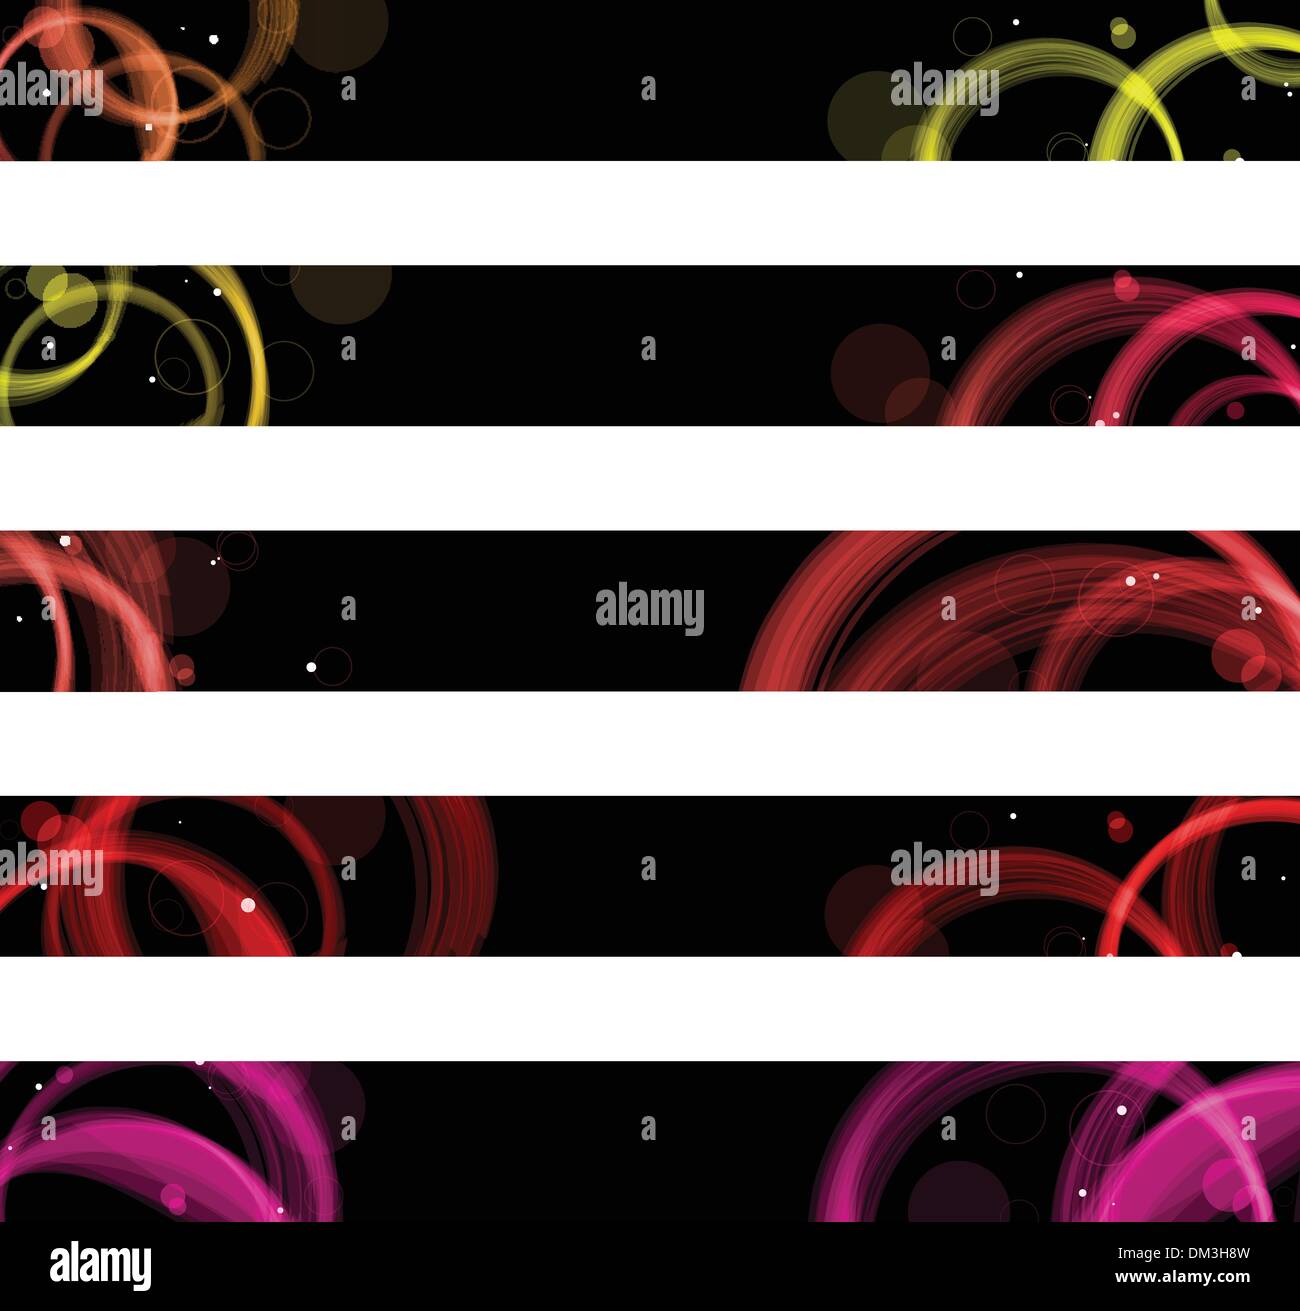 Abstract Colorful Circles Web Banners Size 728x90 Px Stock Vector